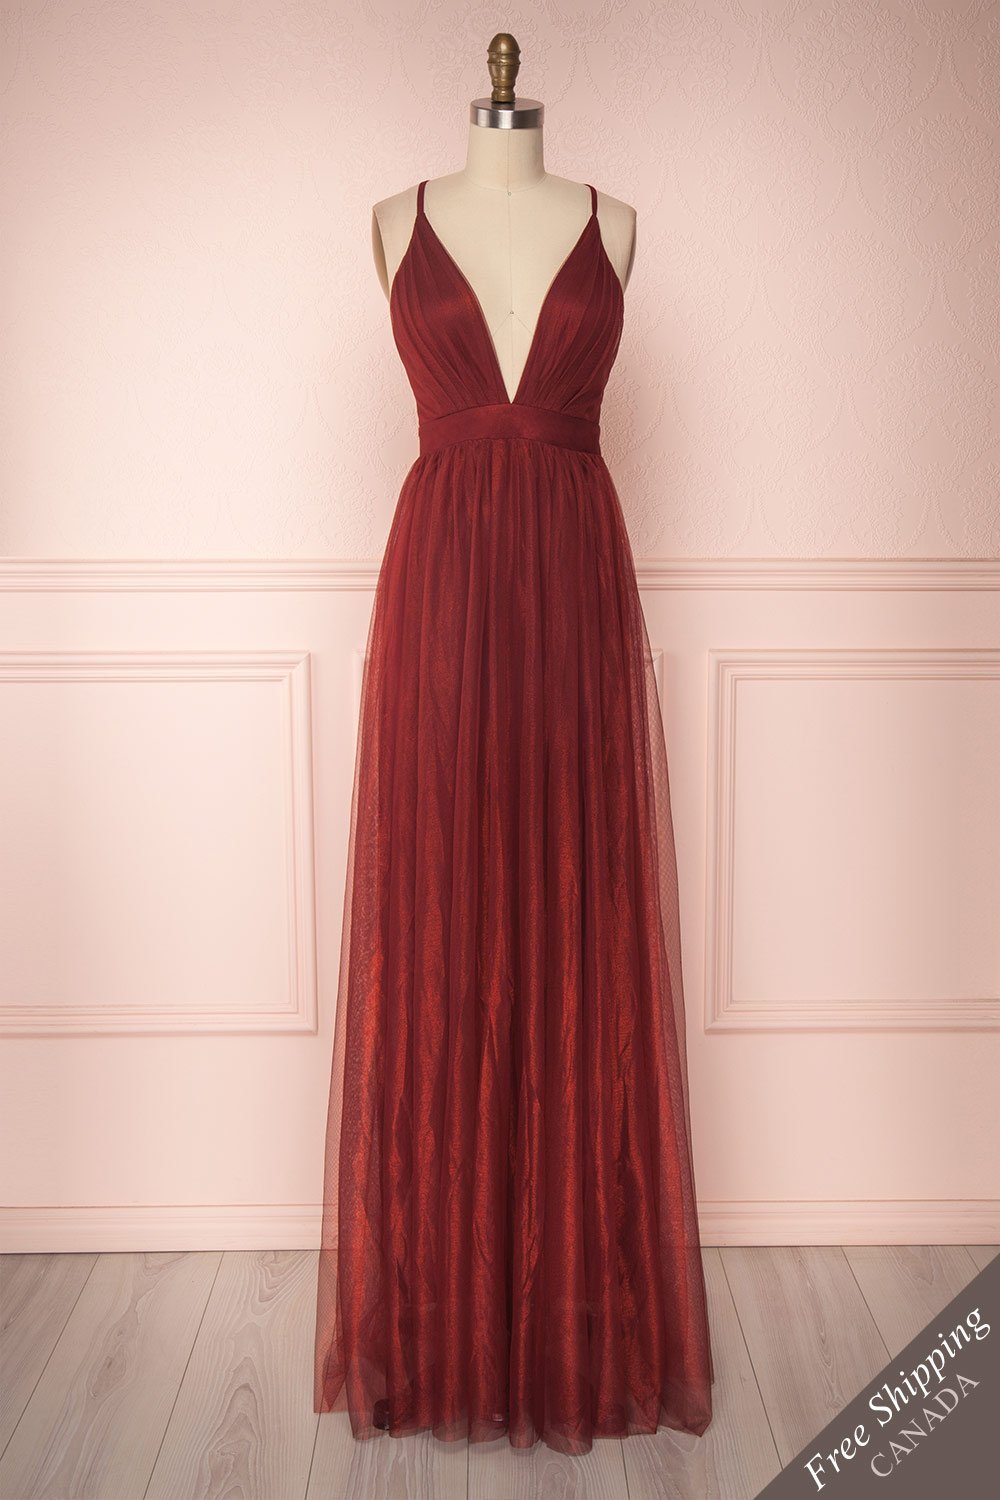 Alecta Bourgogne Red Mesh Gown with Plunging Neckline | Boutique 1861